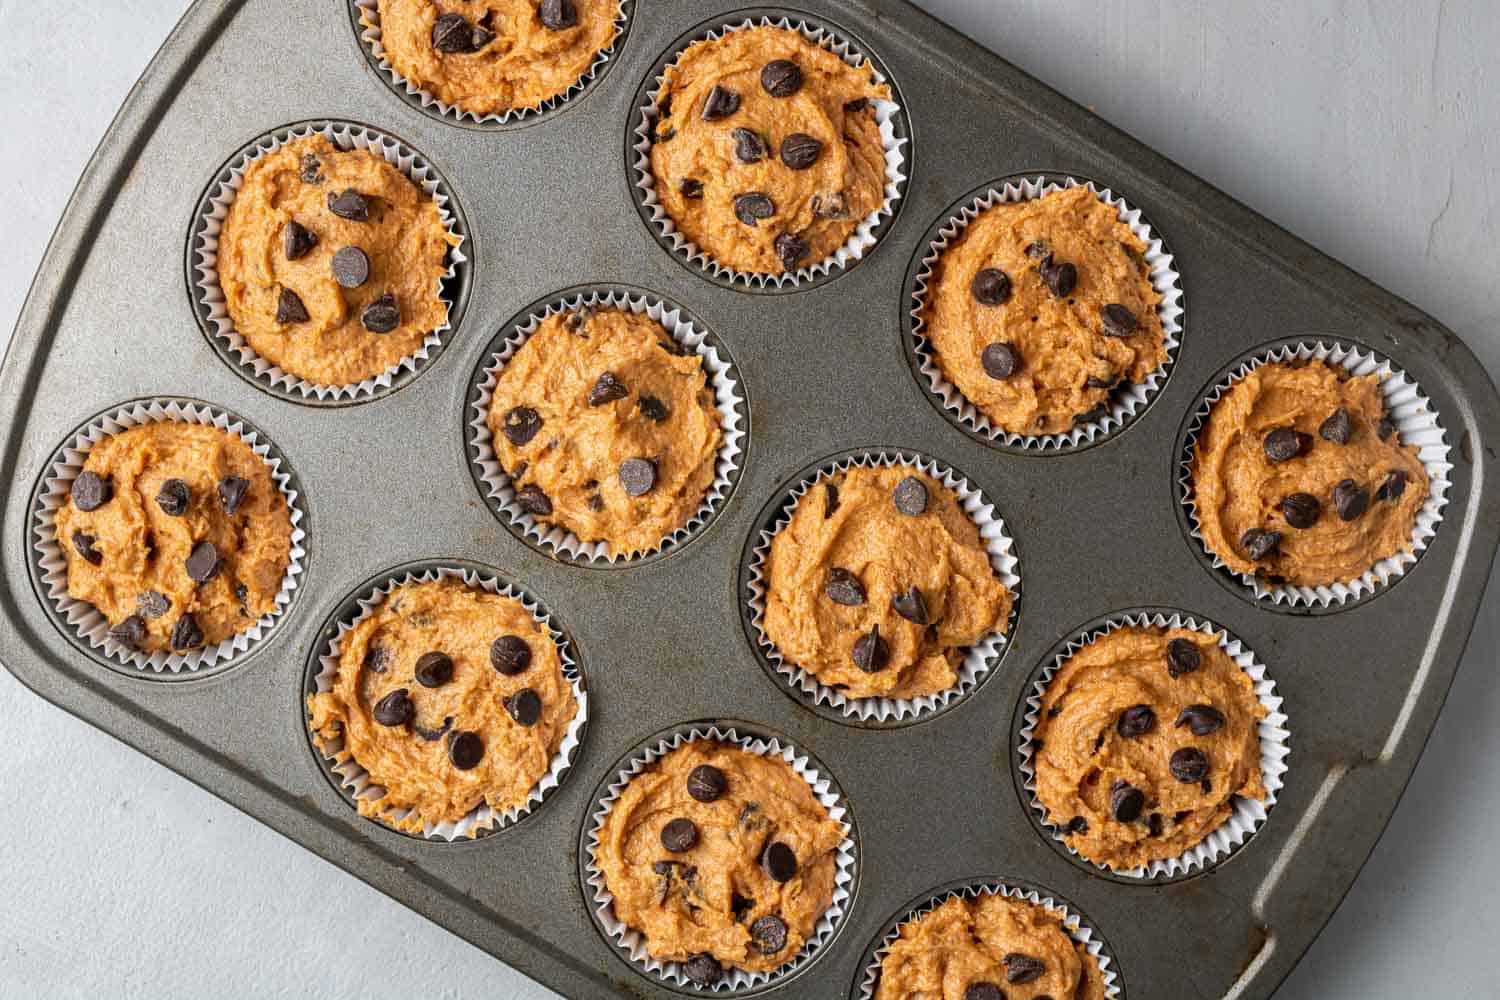 Unbaked muffins in muffin tin.